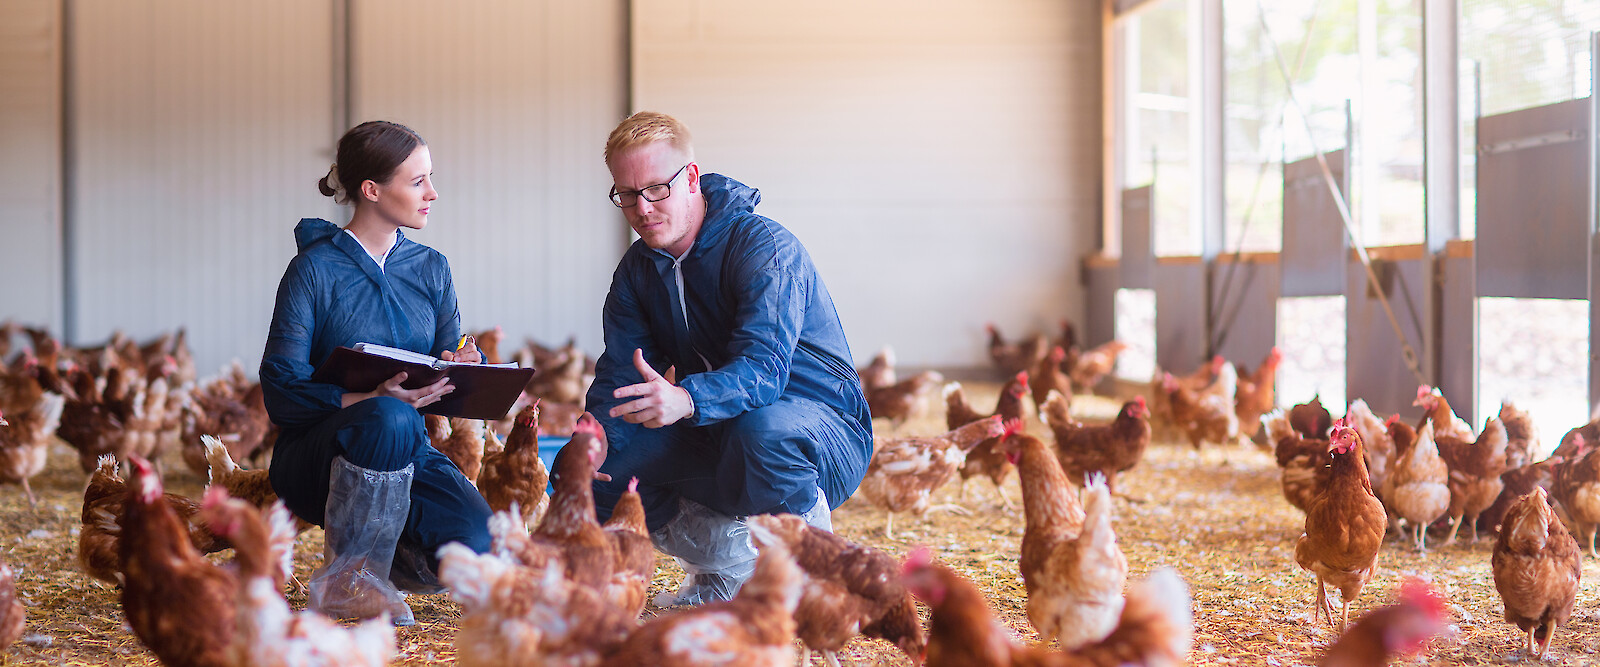 deuka expert advisor for feeding poultry and farmer talking about laying hens and optimal feeding in winter garden (© Deutsche Tiernahrung Cremer).